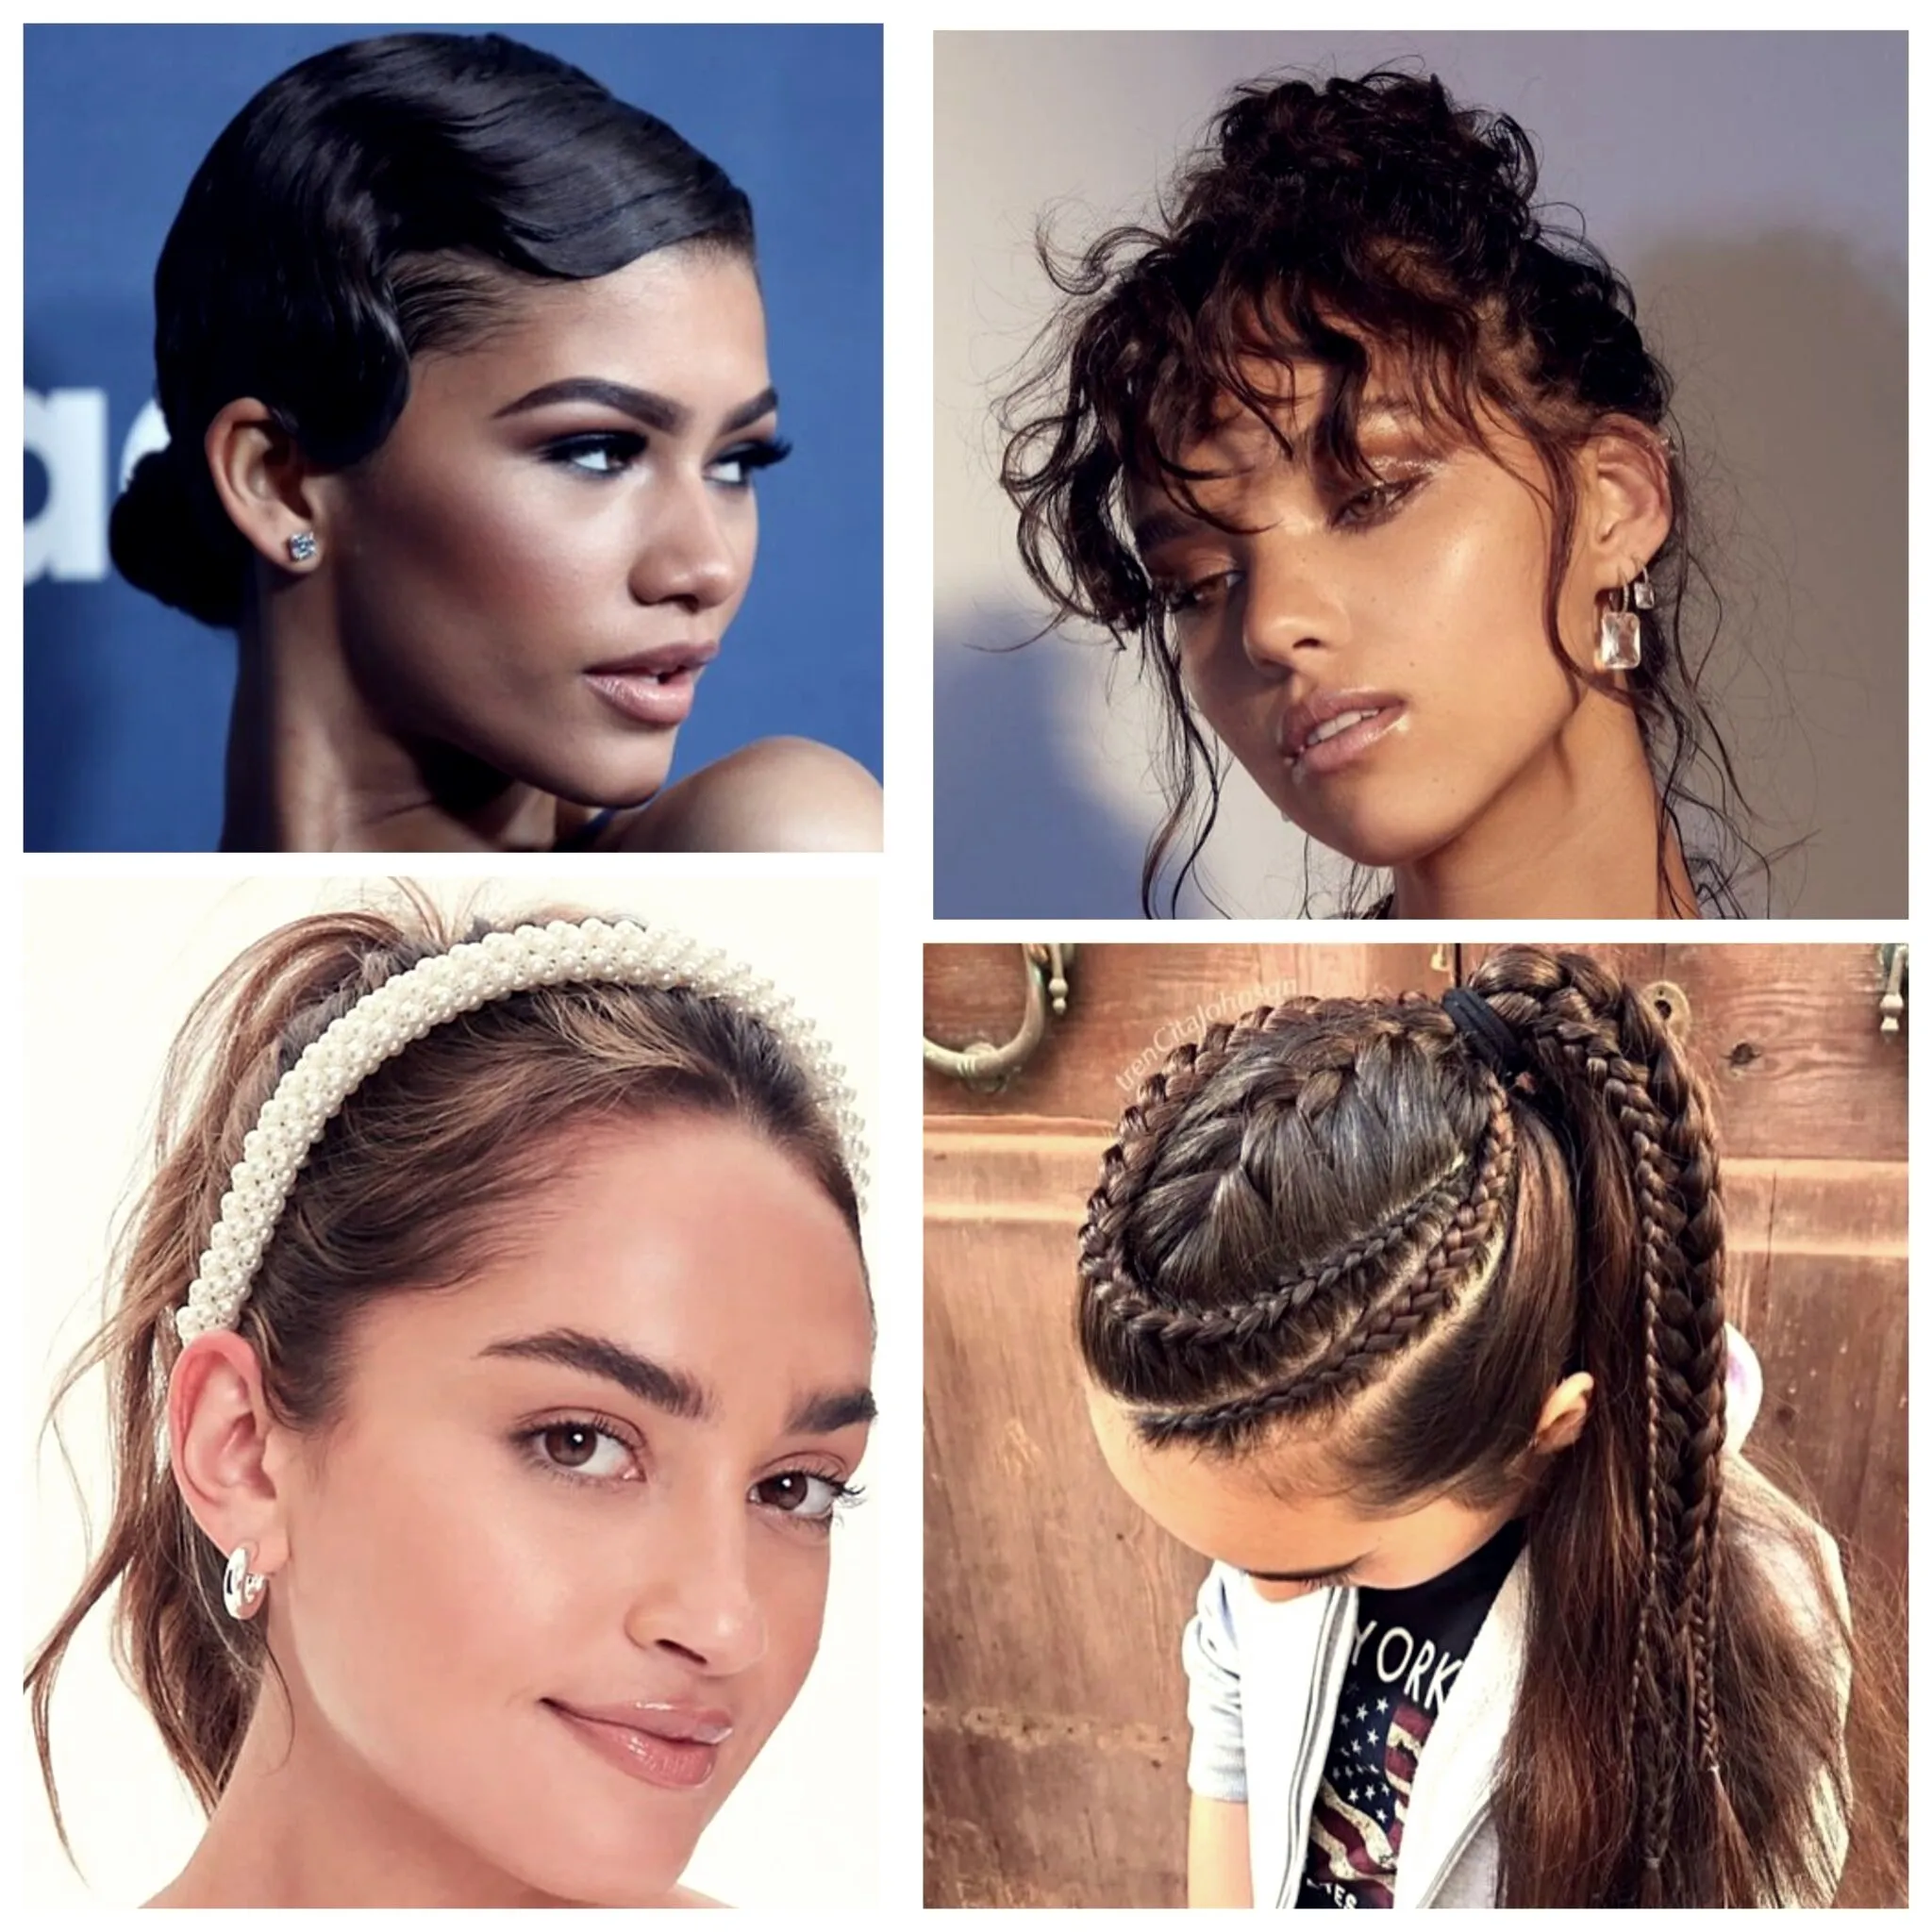 Revealing the Top Trendsetting Hairstyles